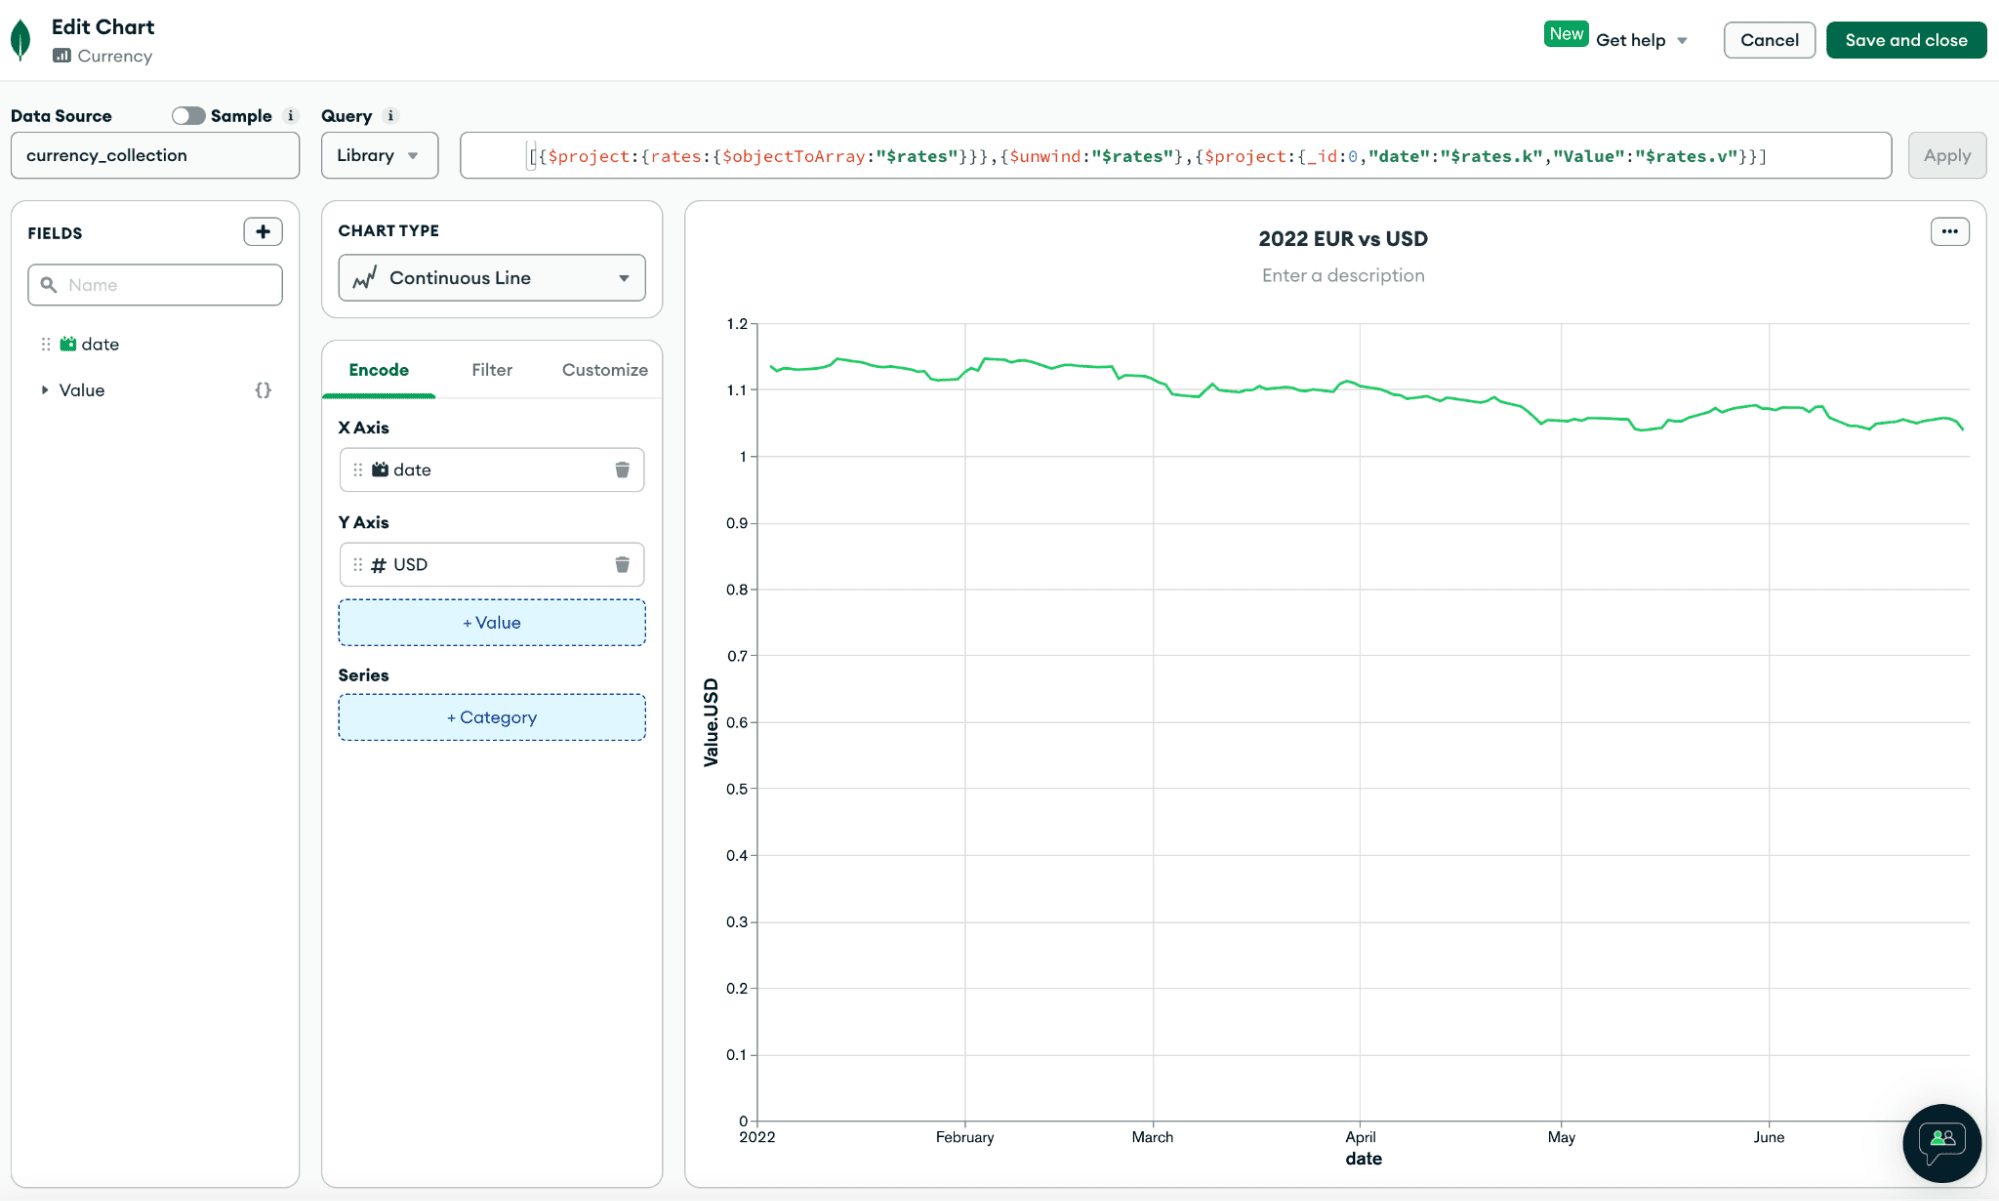 We can add this aggregation pipeline filter into Charts and build out a chart comparing the US dollar (USD) to the Euro (EUR) over this time period.